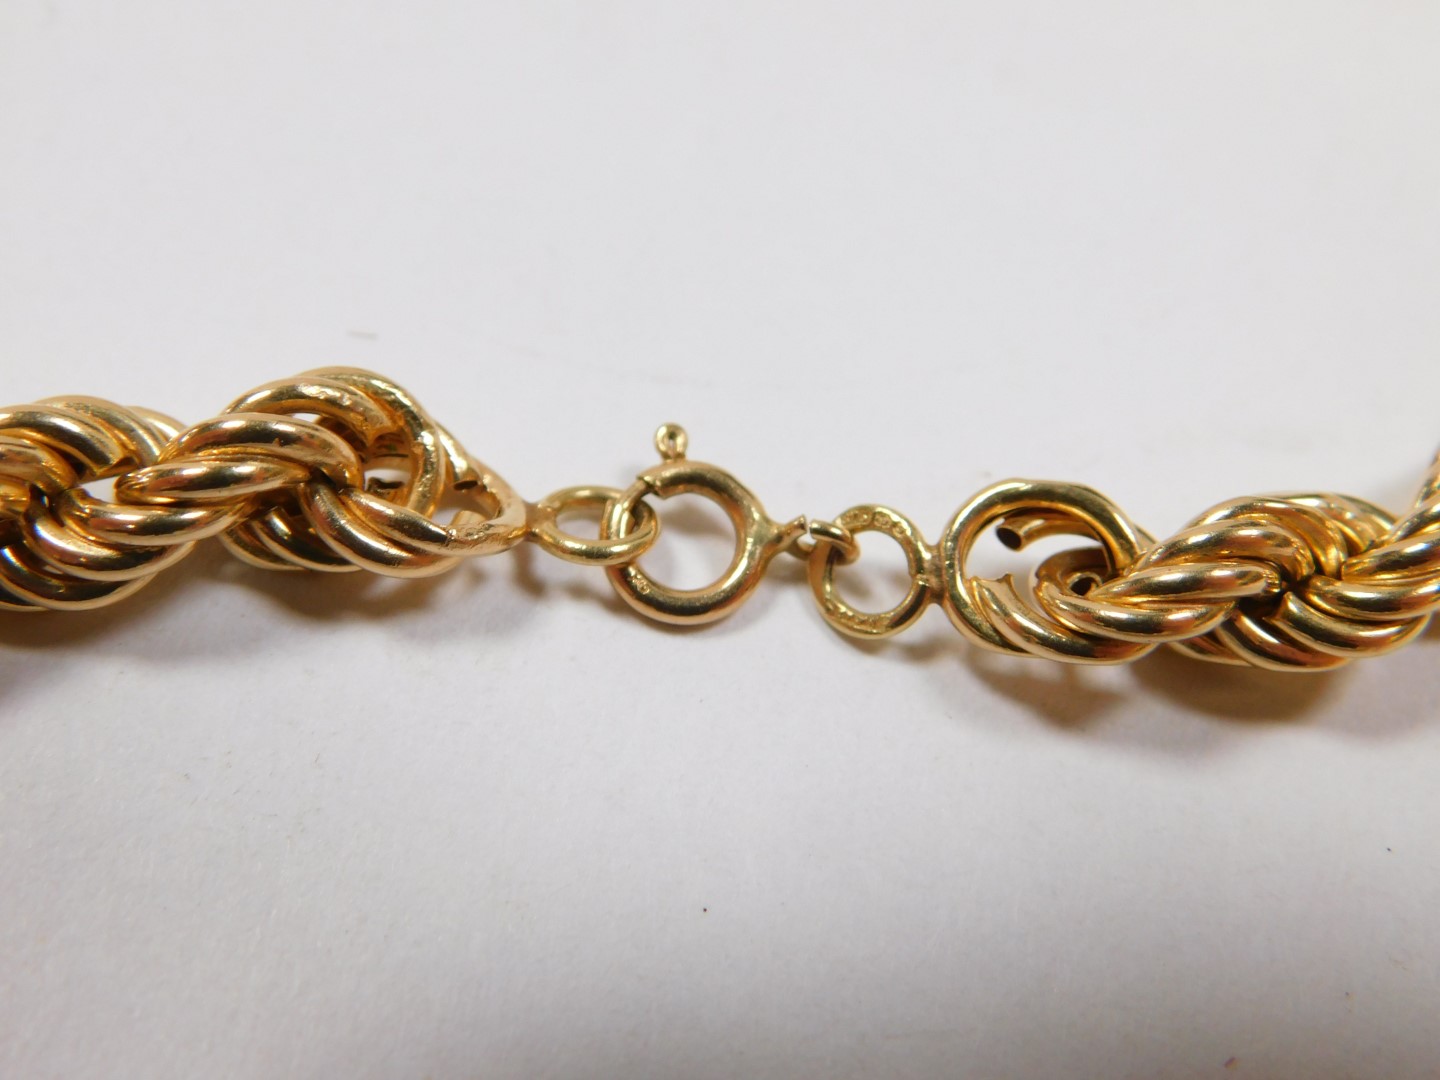 A 9ct gold Prince of Wales neckchain, on a bolt ring clasp, 34.8g. - Image 3 of 3